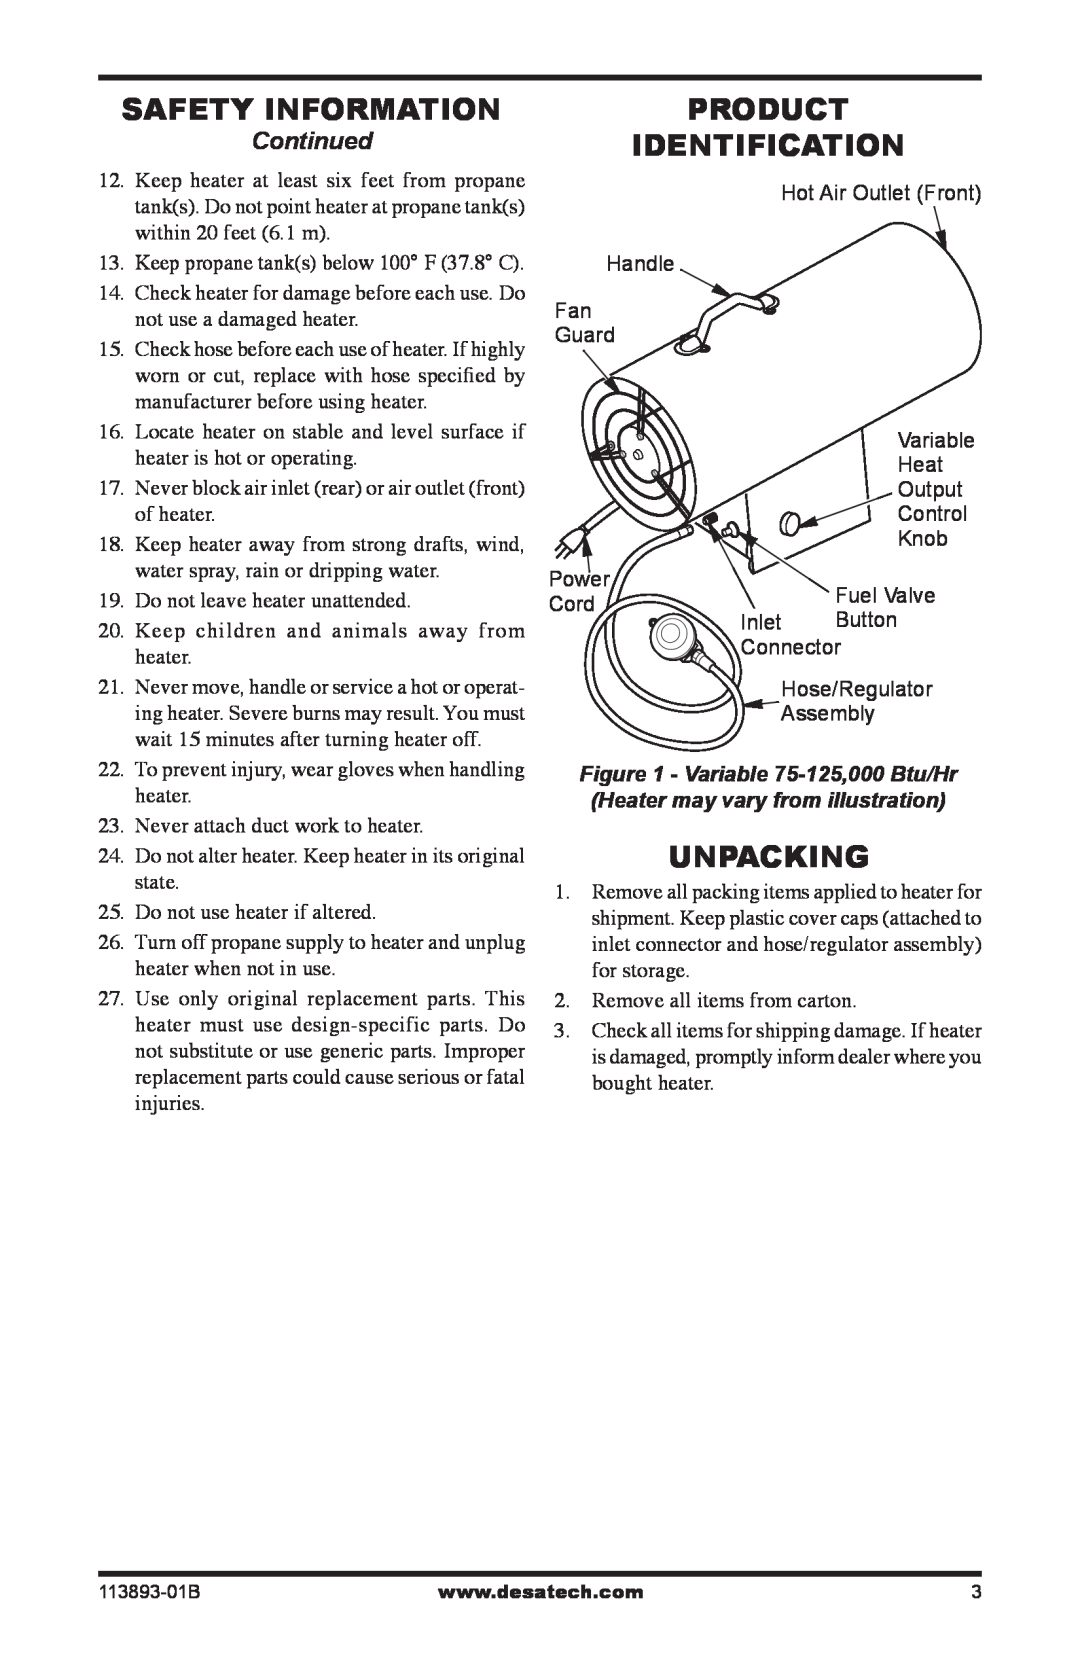 Desa Air Conditioner owner manual Safety Information, Product Identification, Unpacking, Continued 